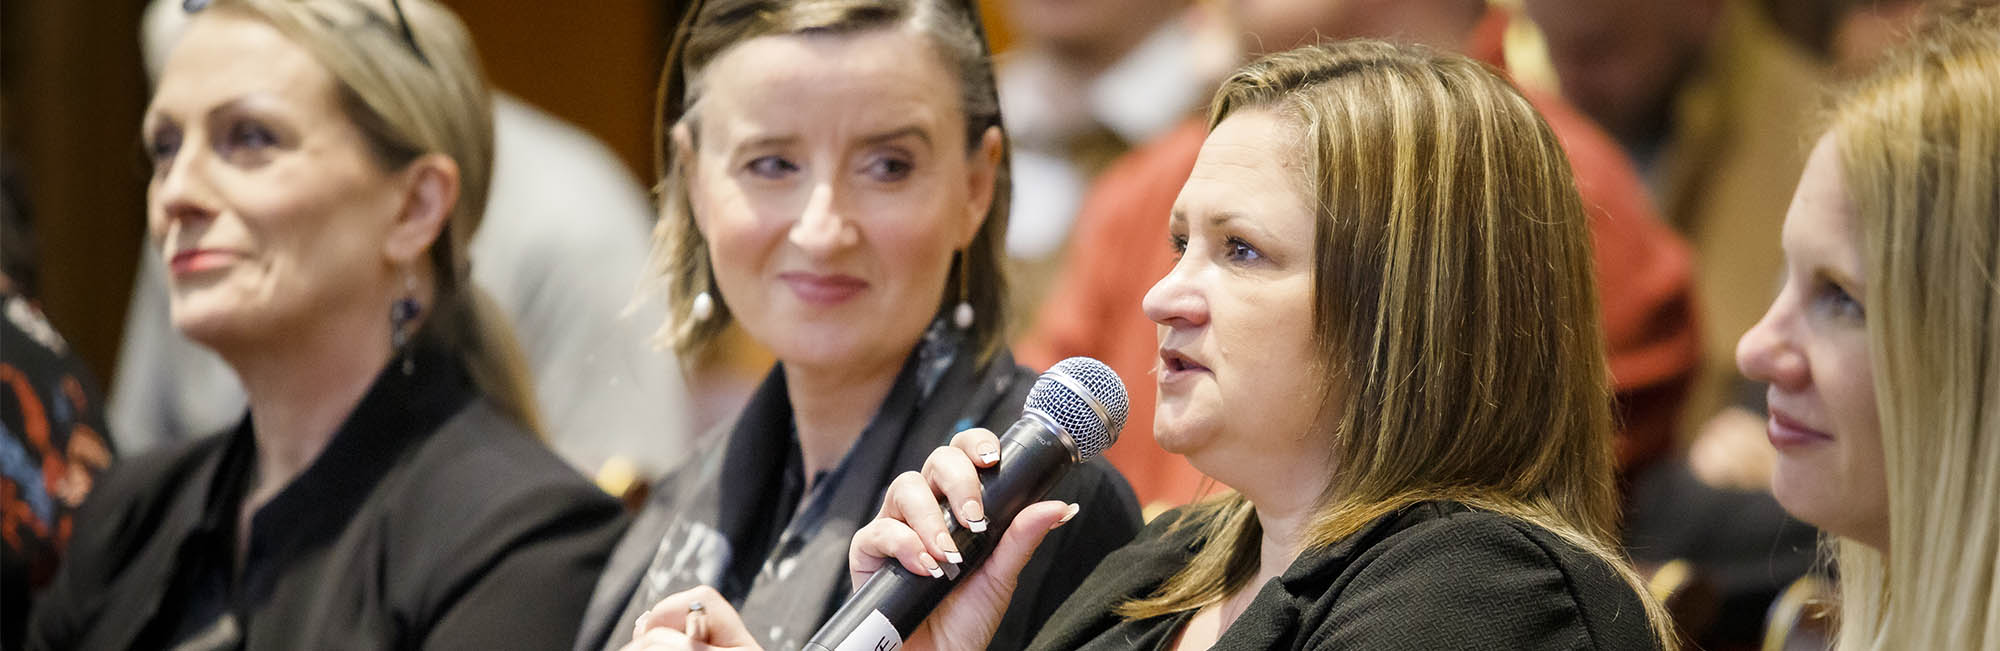 woman speaking into a microphone at an event